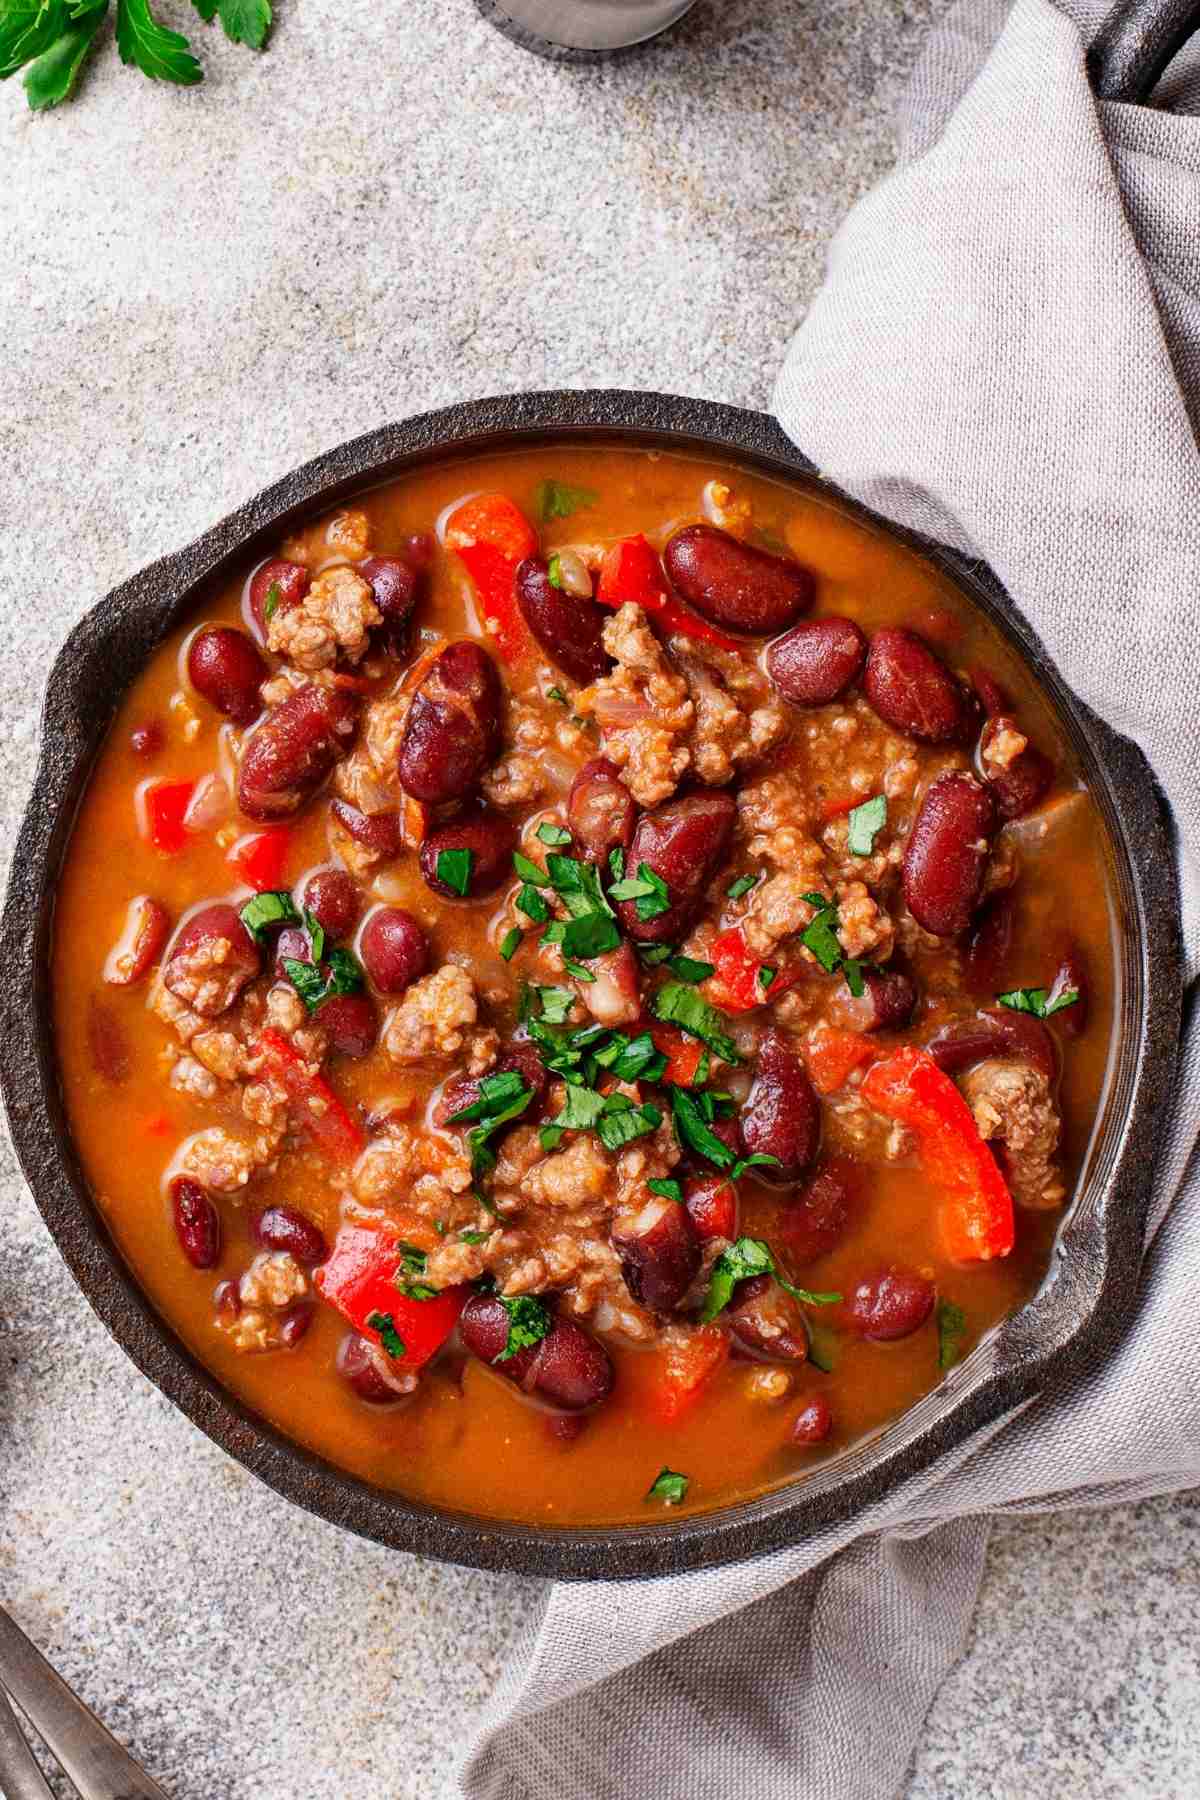 Chili is one of those comforting meals that everyone loves. As it continues to grow in popularity, so does the range of ingredients used to make it! This article explores the Best Beans for Chili, including canned chili beans and dried beans.